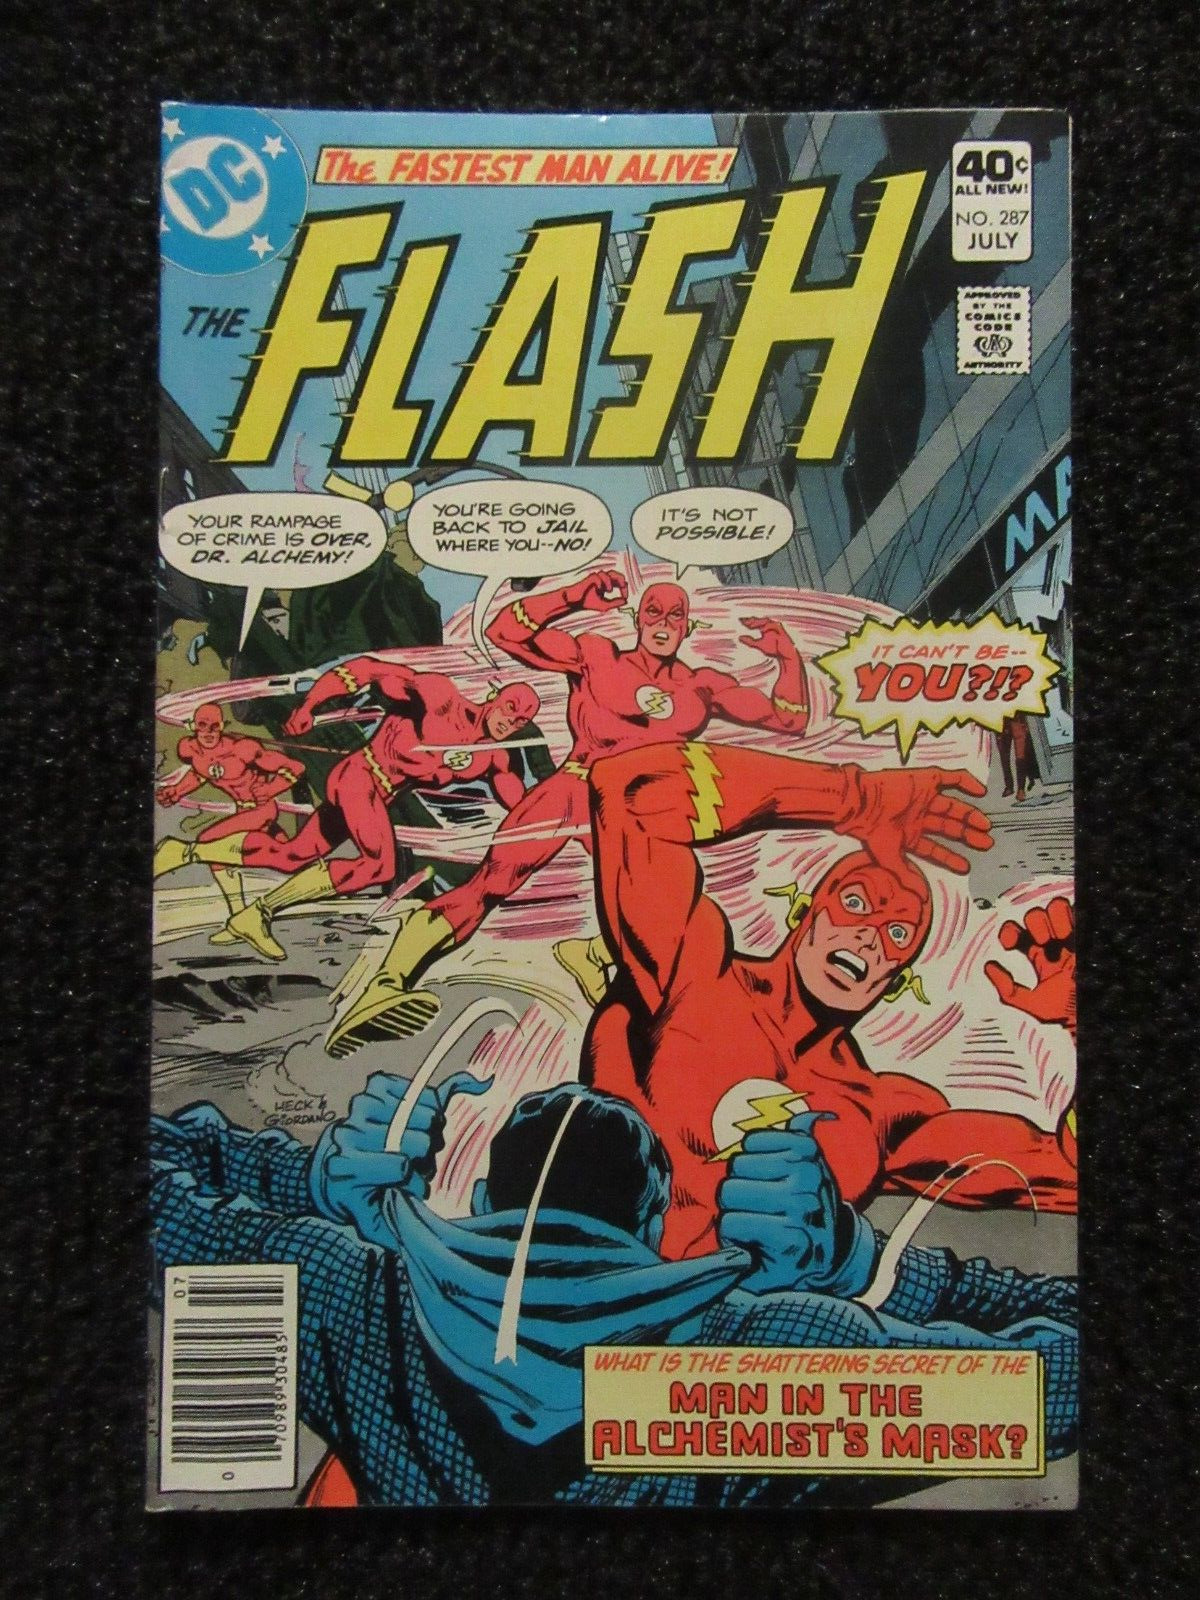 The Flash #287 July 1980 Glossy Tight Complete Book We Combine Shipping